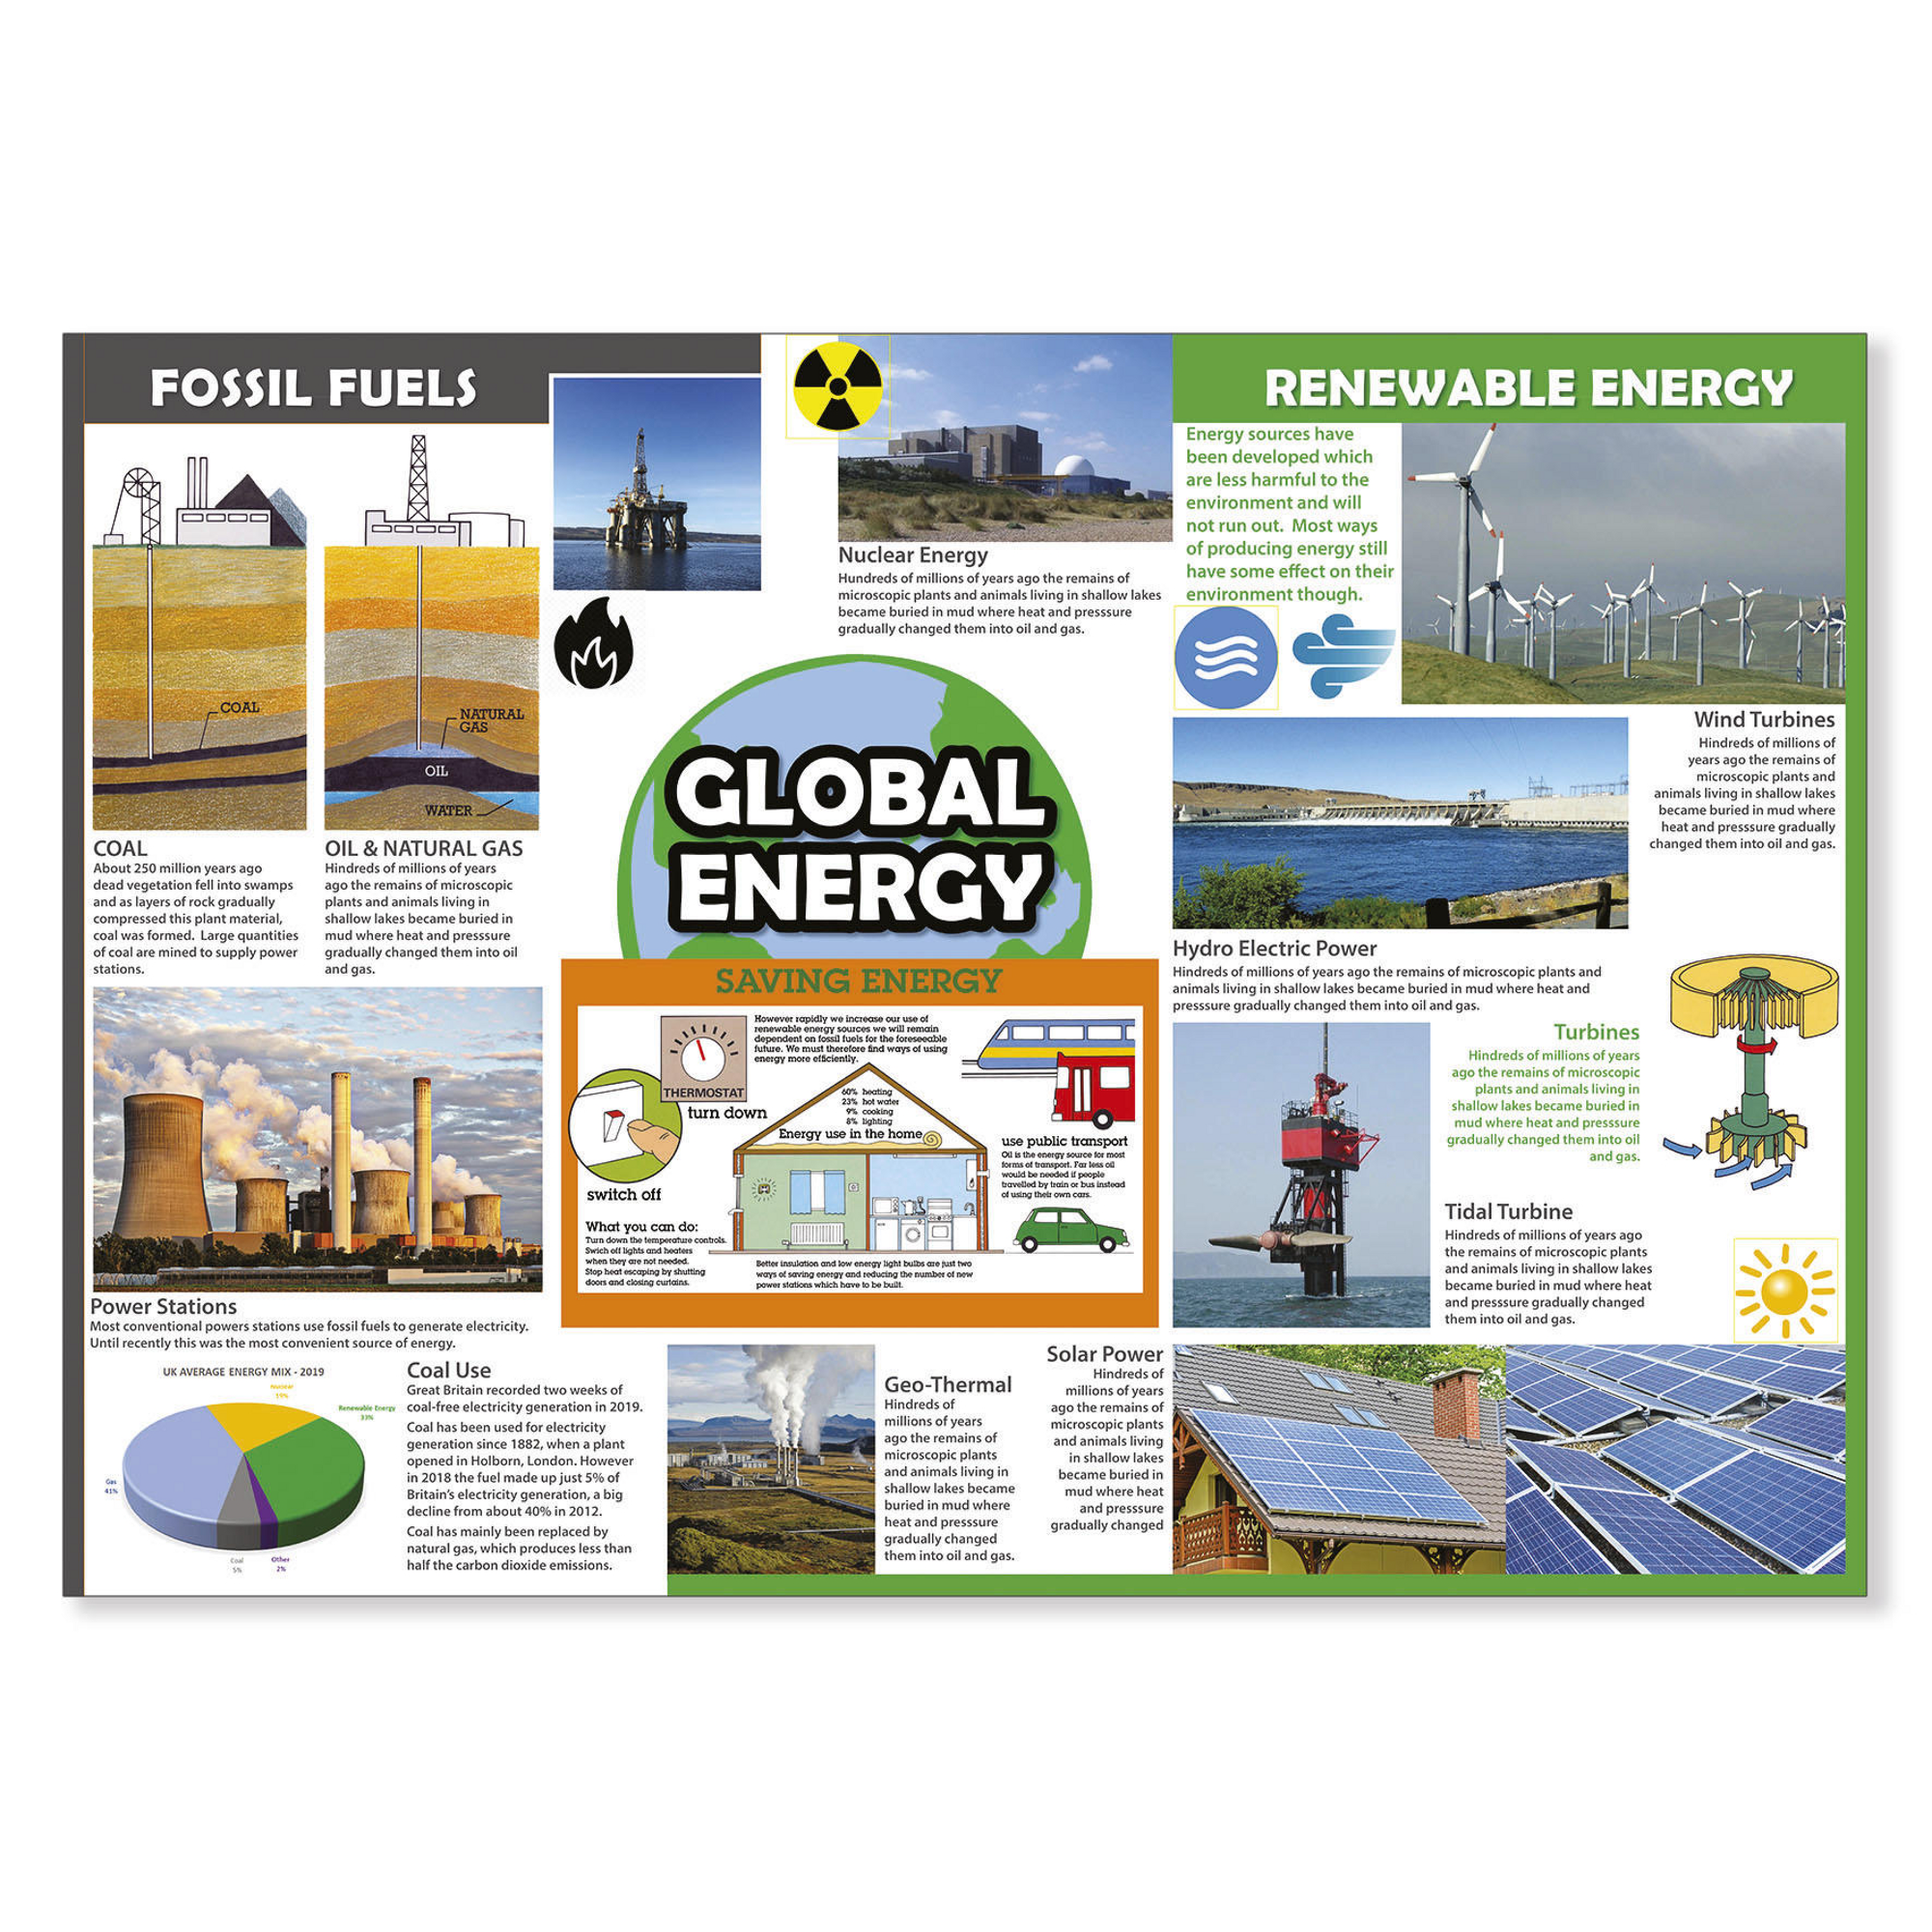 renewable energy sources posters